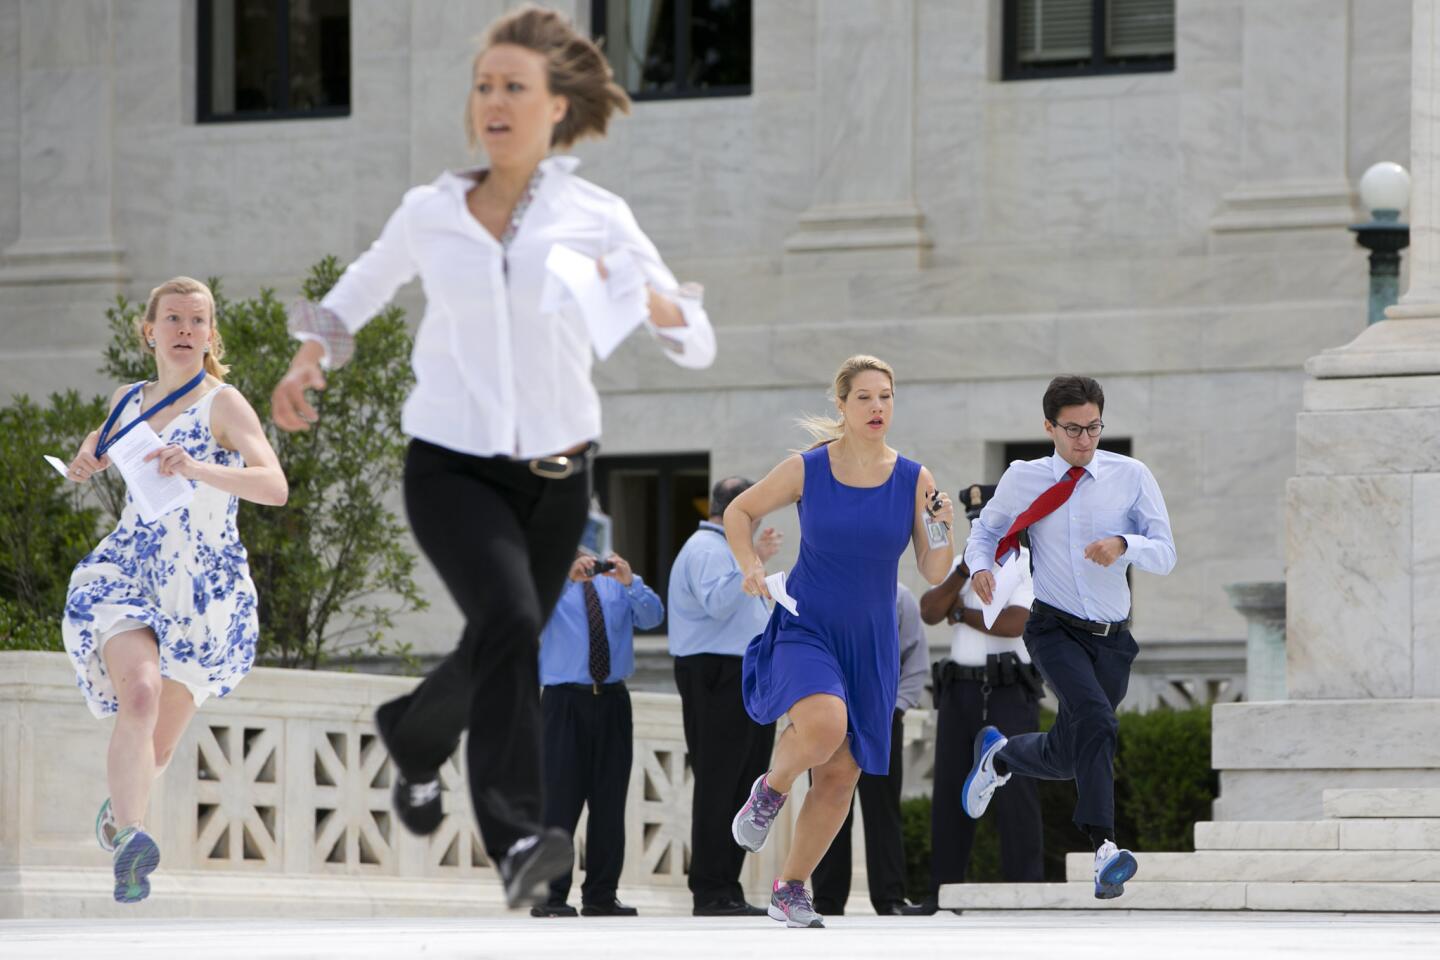 Interns run across the plaza of the Supreme Court in Washington, Thursday, June 25, 2015, to report the decided opinions to television stations, an event sometimes referred to as the "running of the interns." The Supreme Court on Thursday upheld the nationwide tax subsidies under President Barack Obama's health care overhaul, in a ruling that preserves health insurance for millions of Americans.